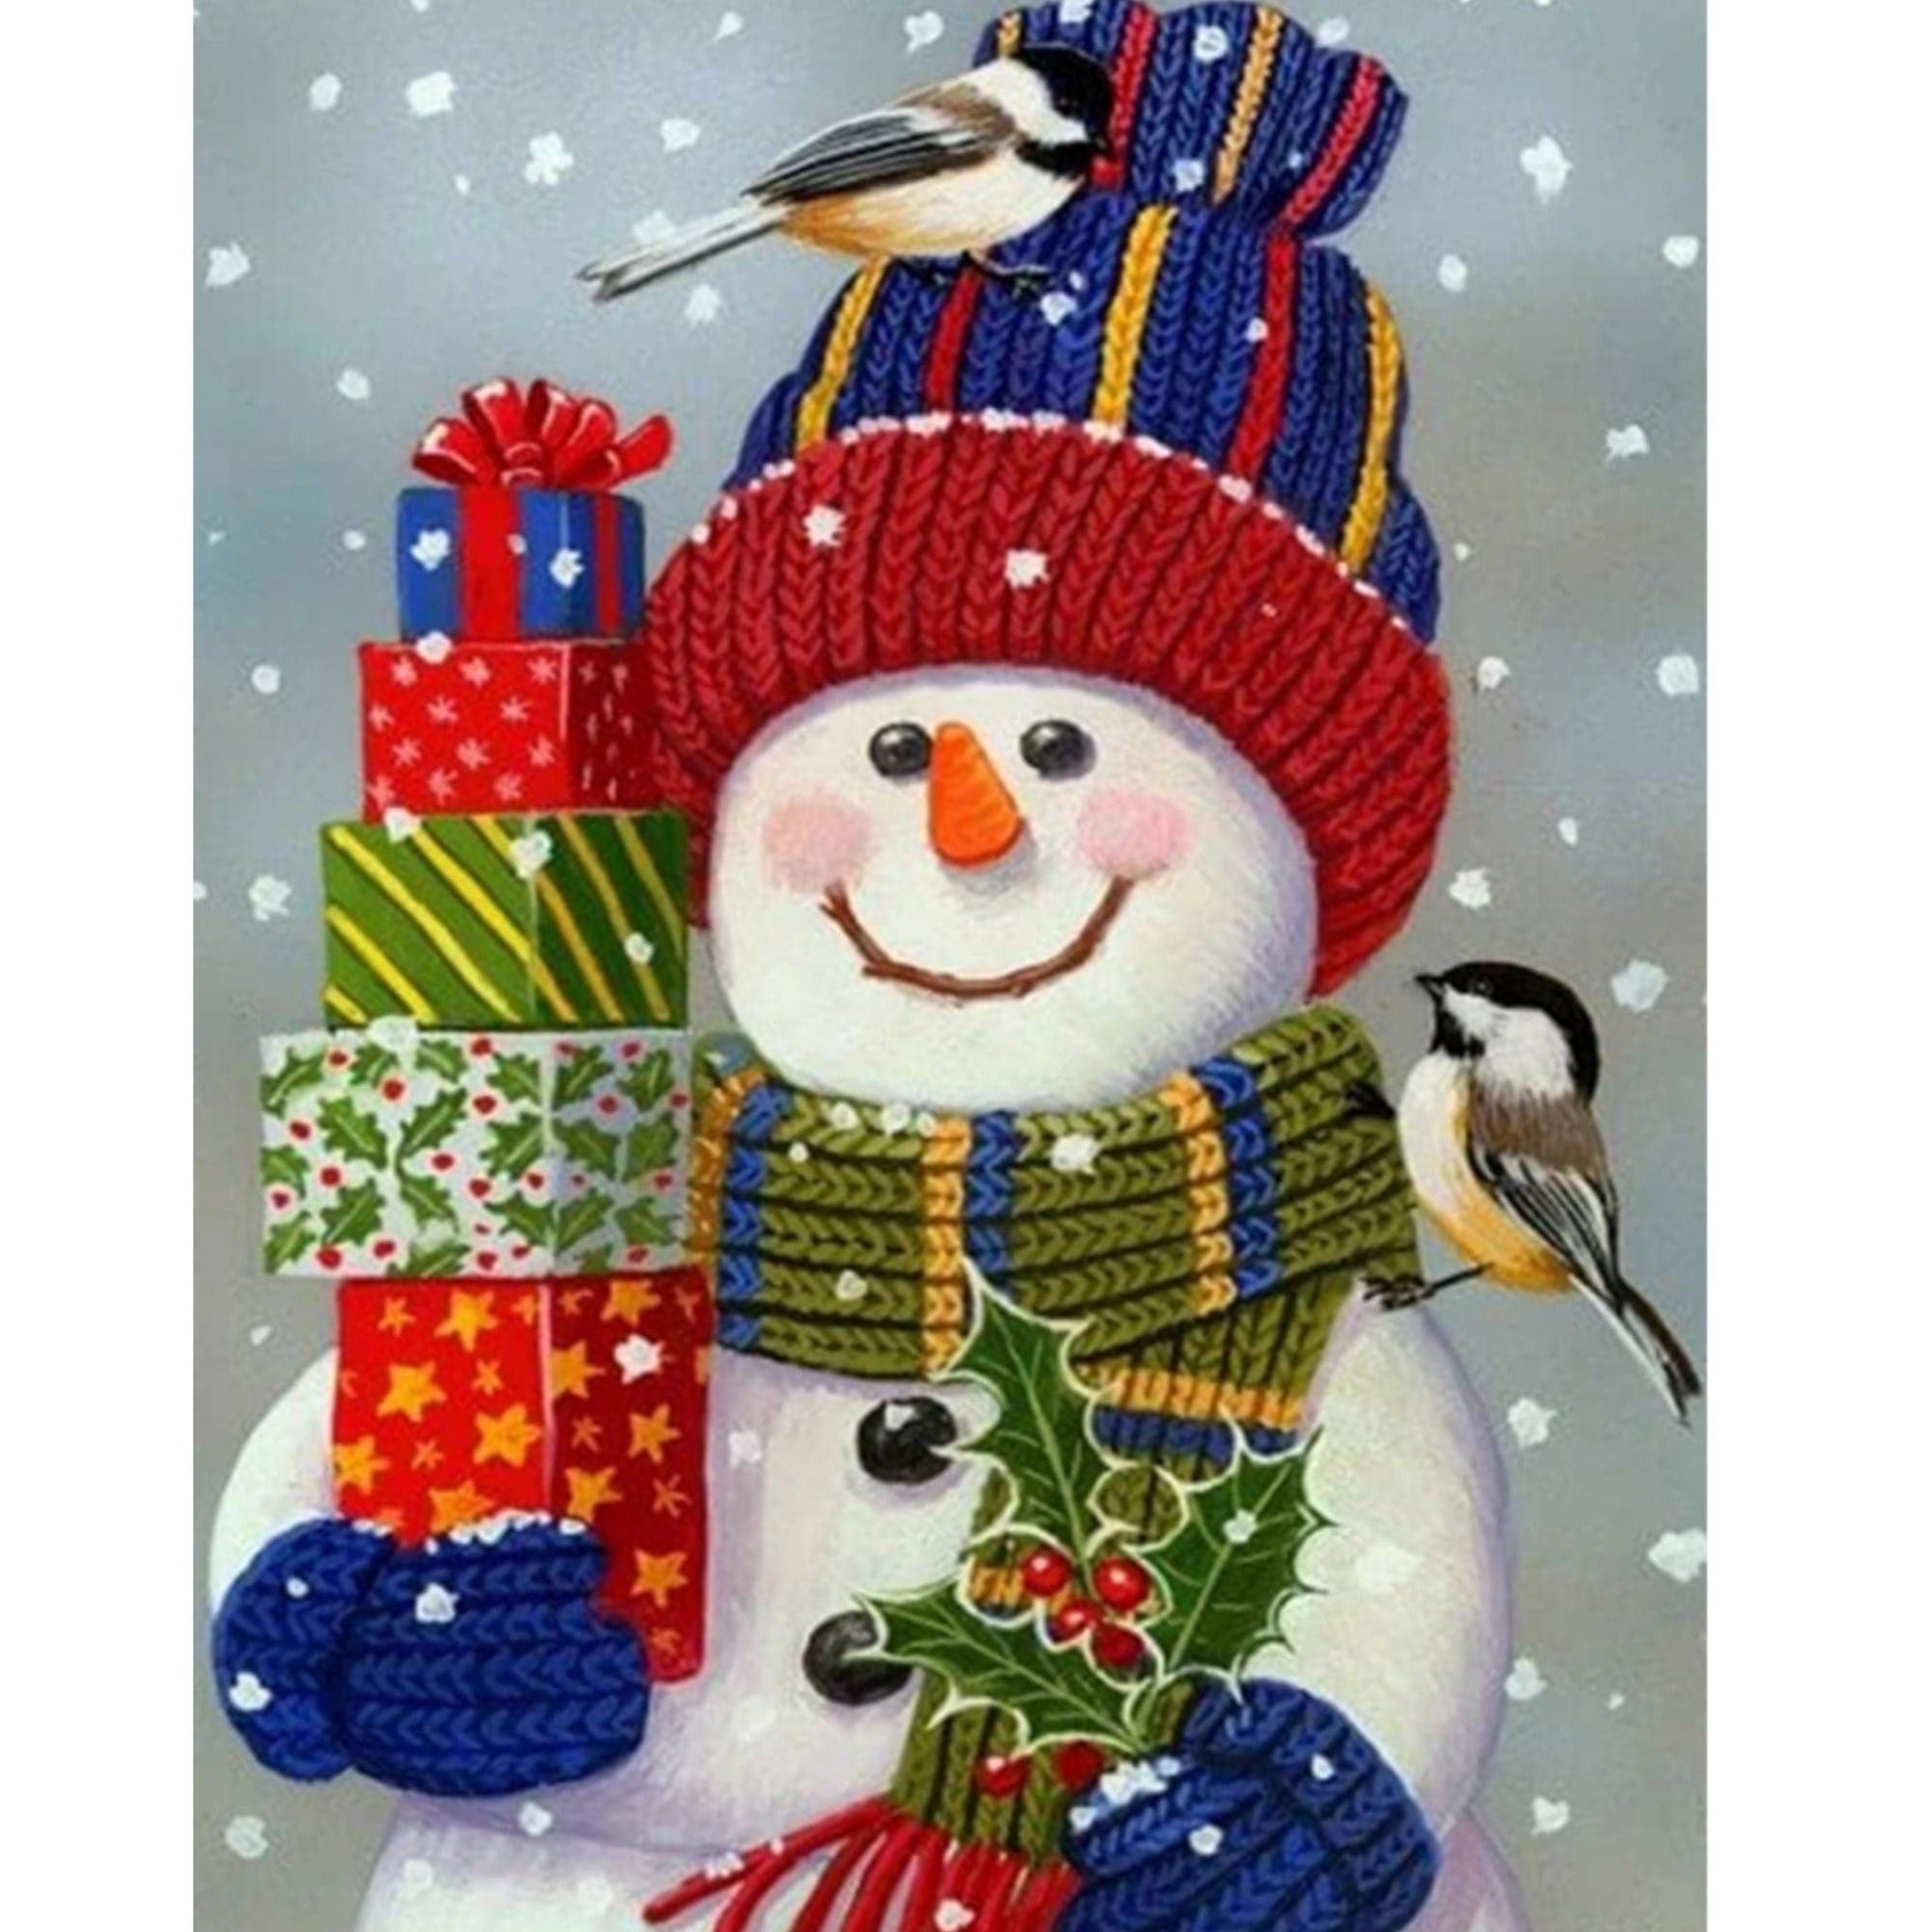 Snowman with Gifts Present Diamond Painting Art Kit 5D Full Drill Round 35*35 cm - Durazza